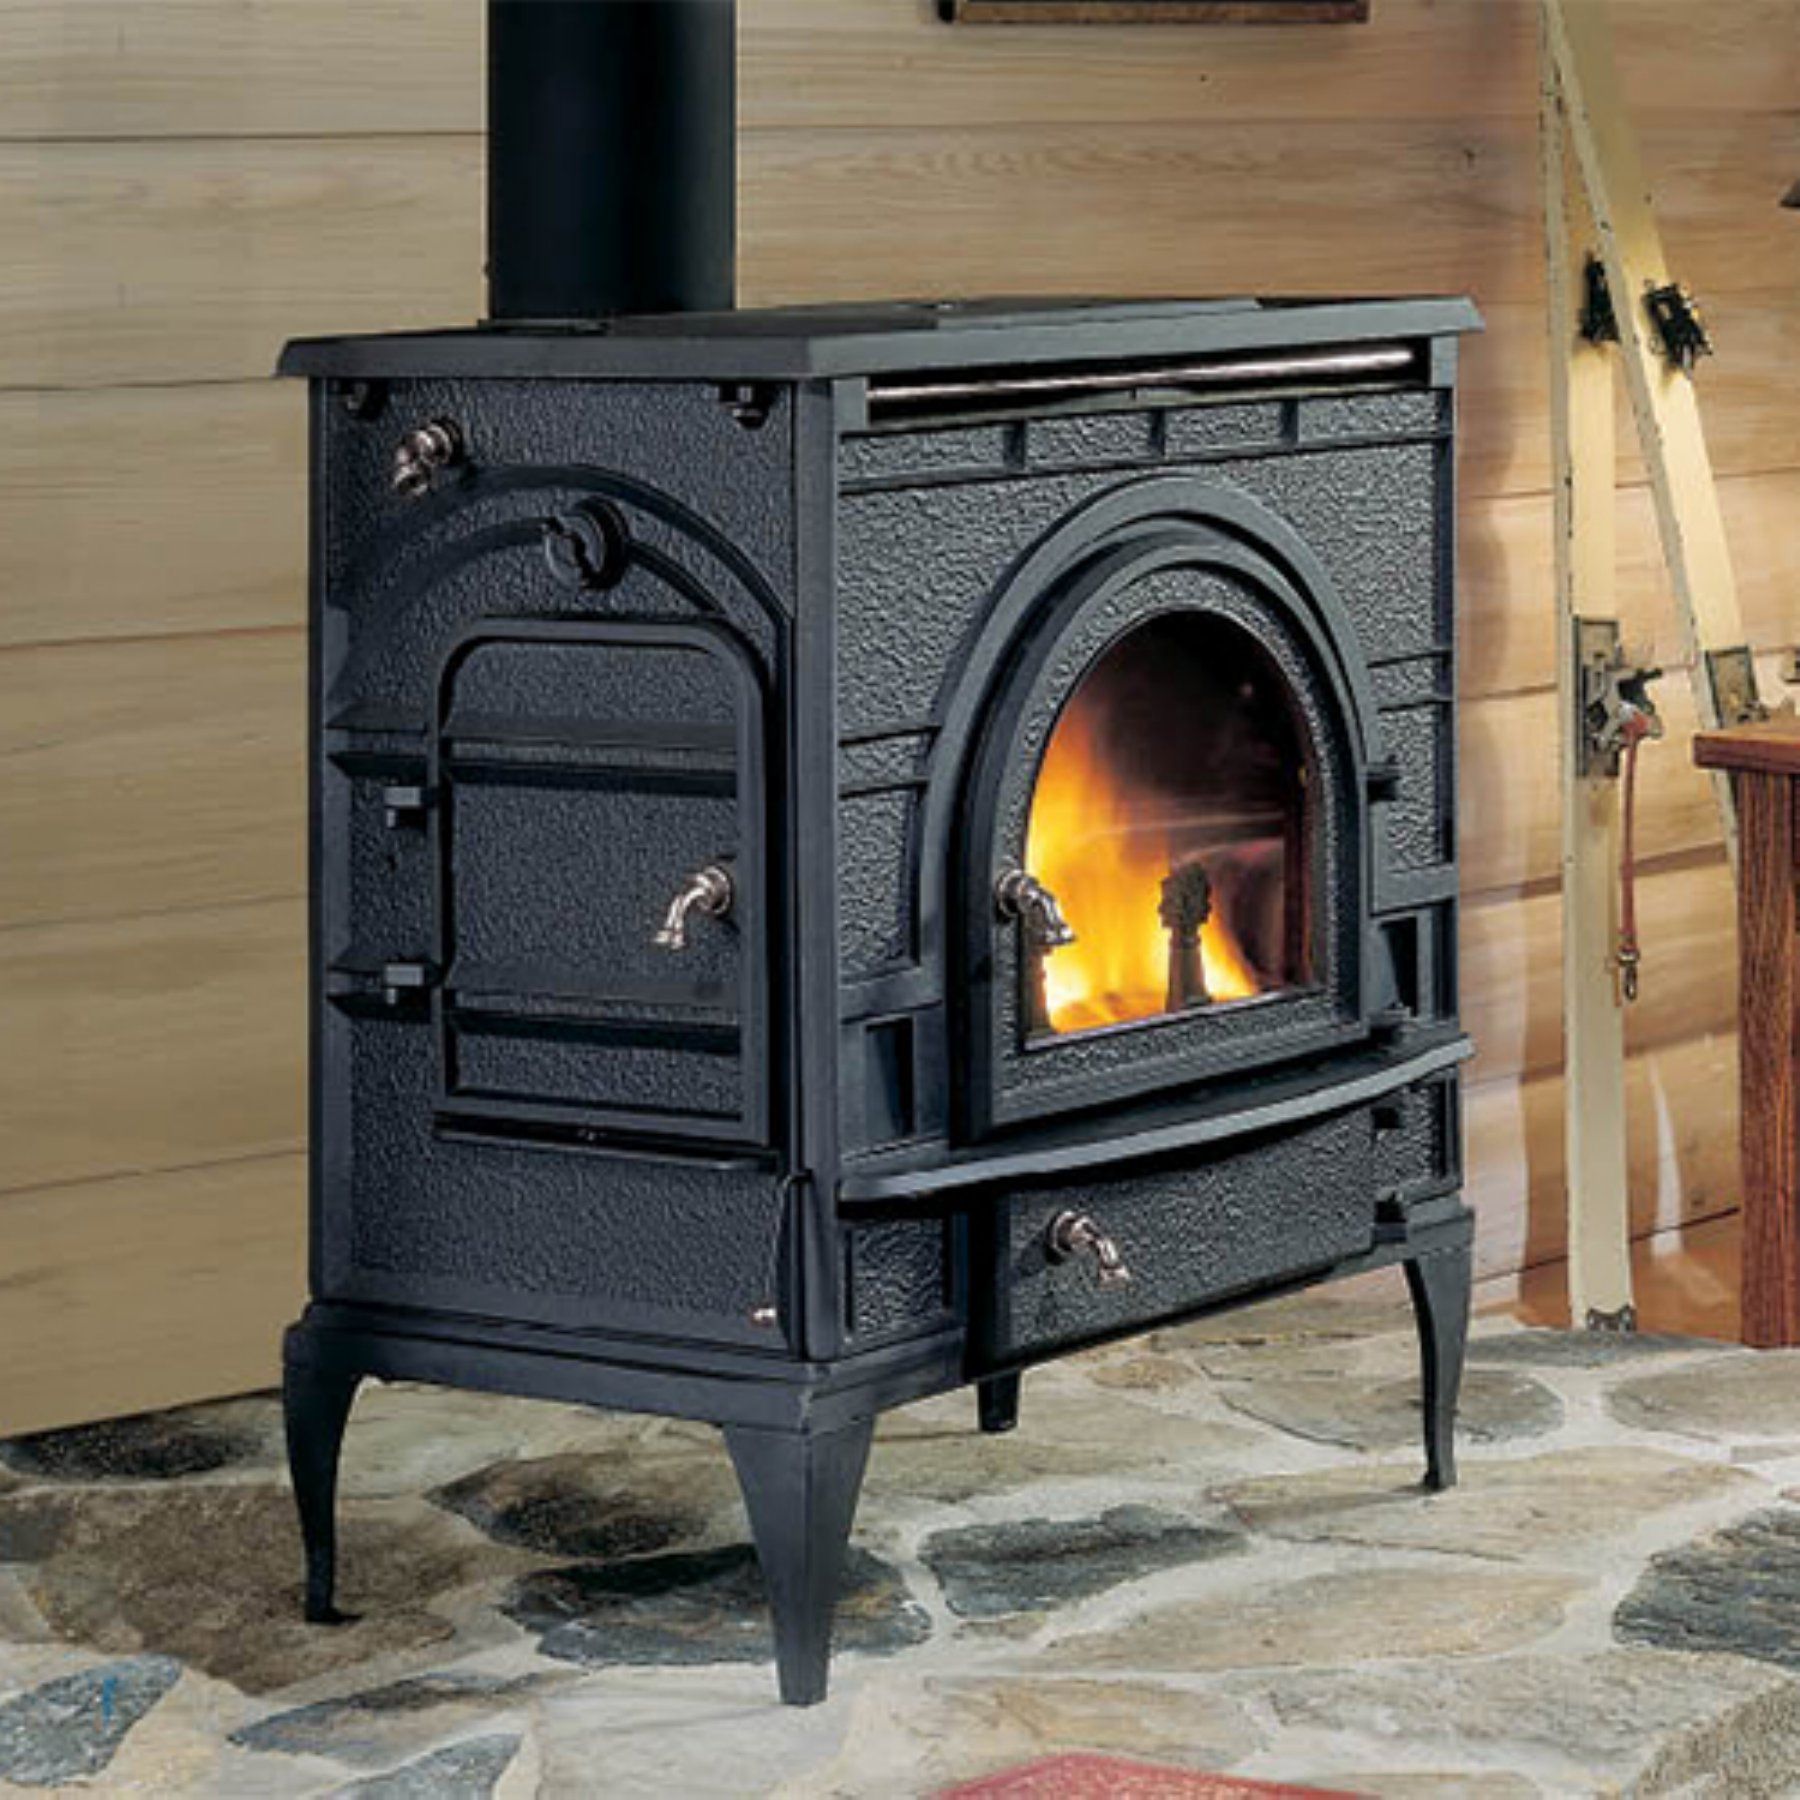 How to Make Fireplace More Efficient Beautiful Pin On Products